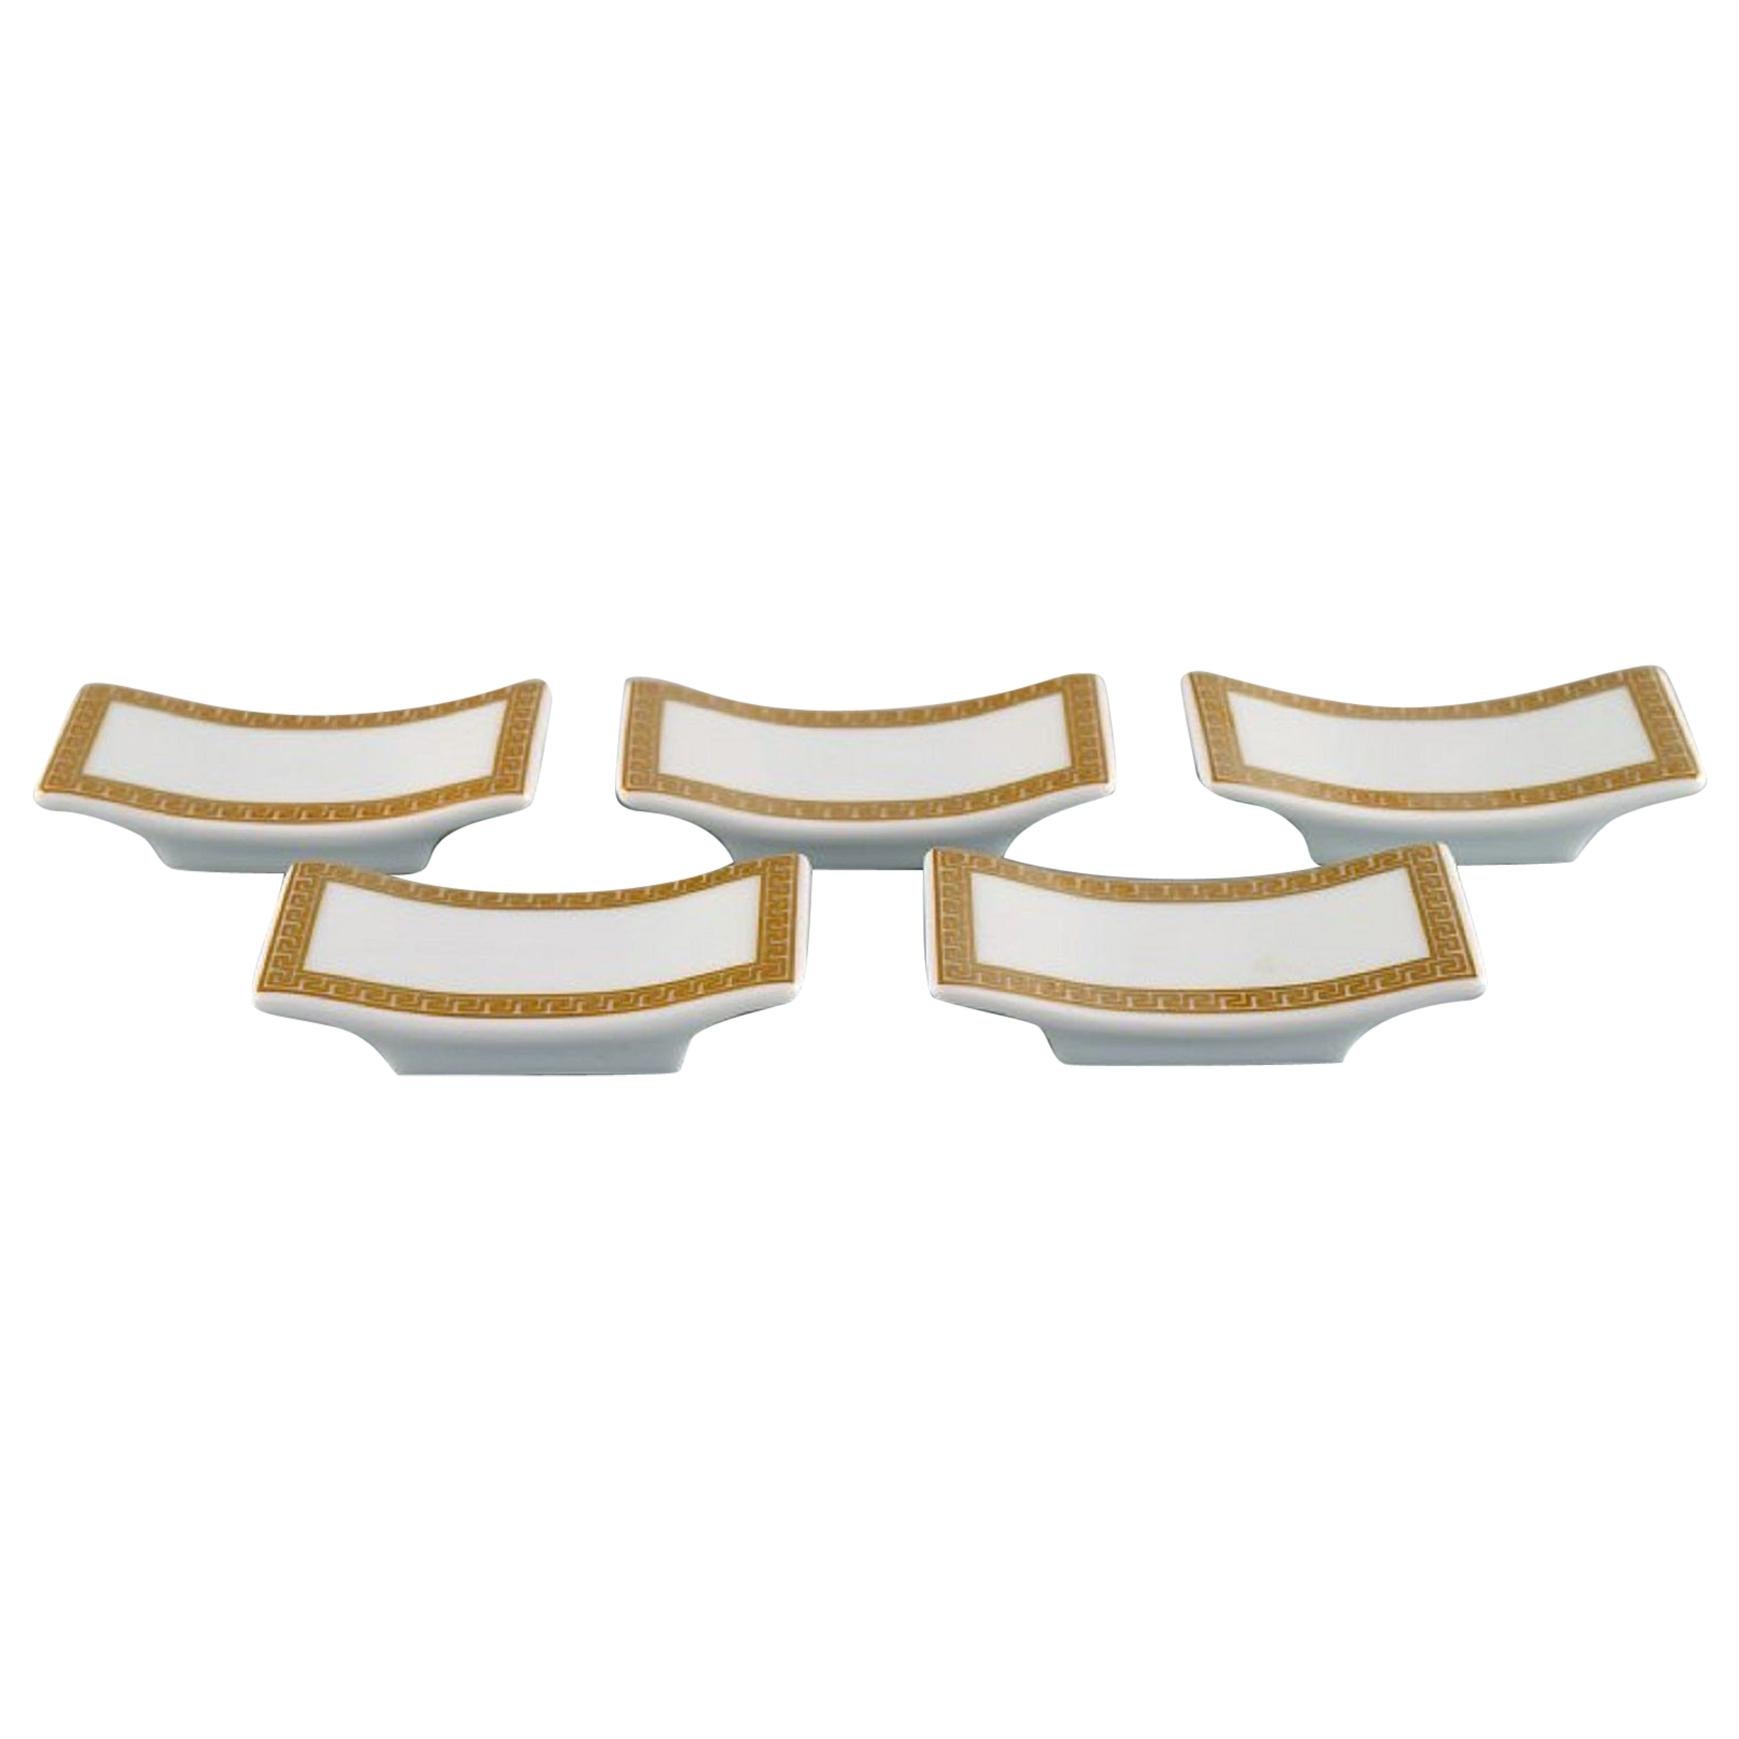 Gianni Versace for Rosenthal, Five Knife Rests in White Porcelain